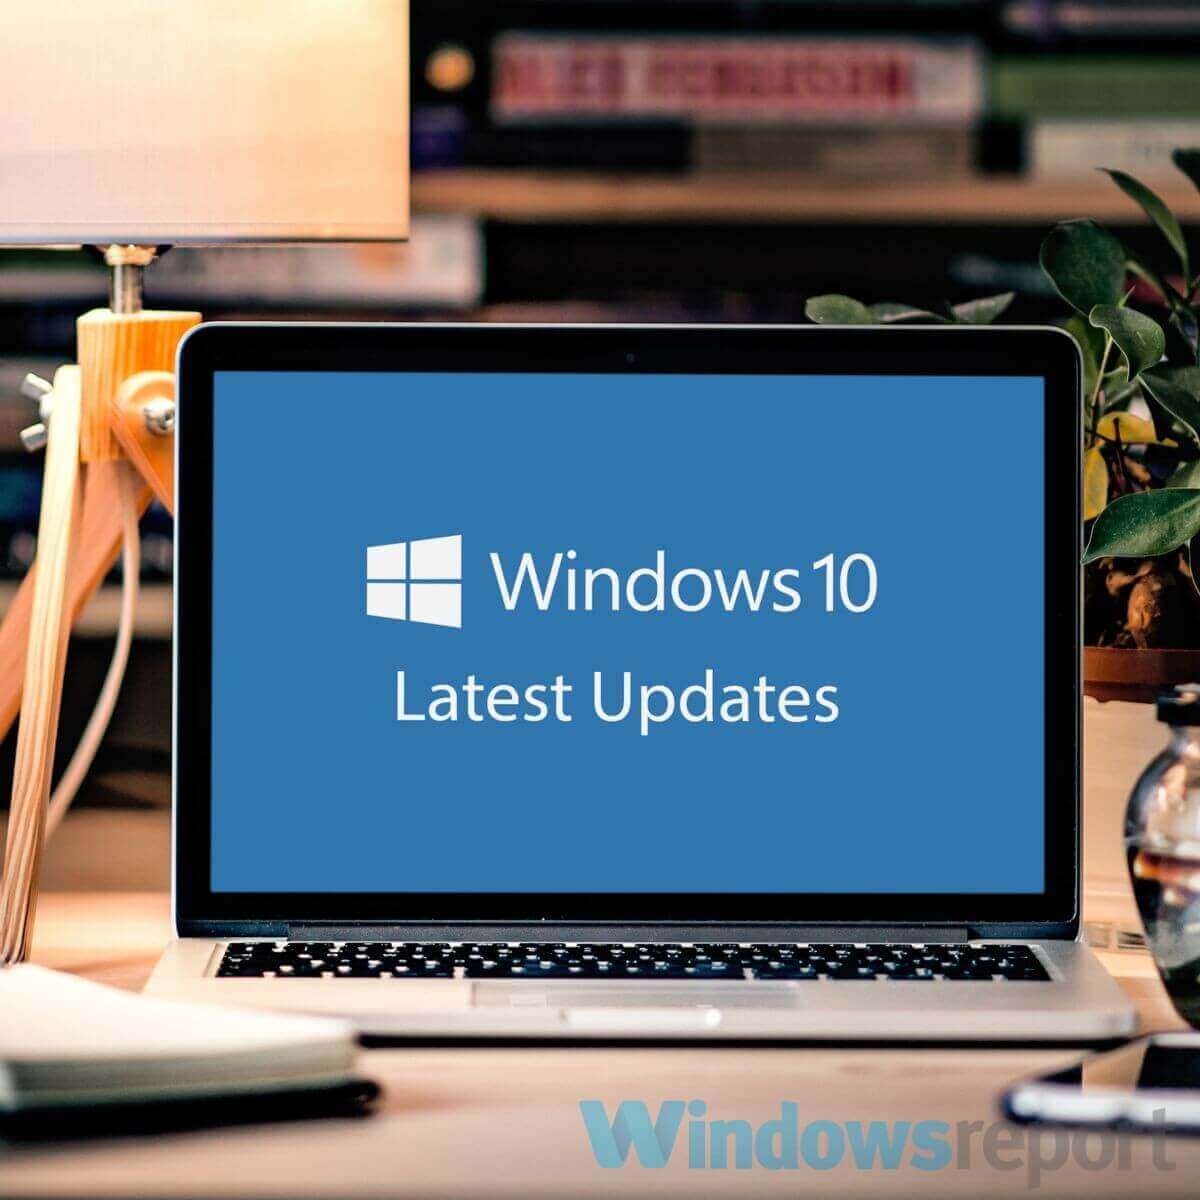 Download Windows 10 v1709 and Windows 10 v1607 Patch tuesday updates